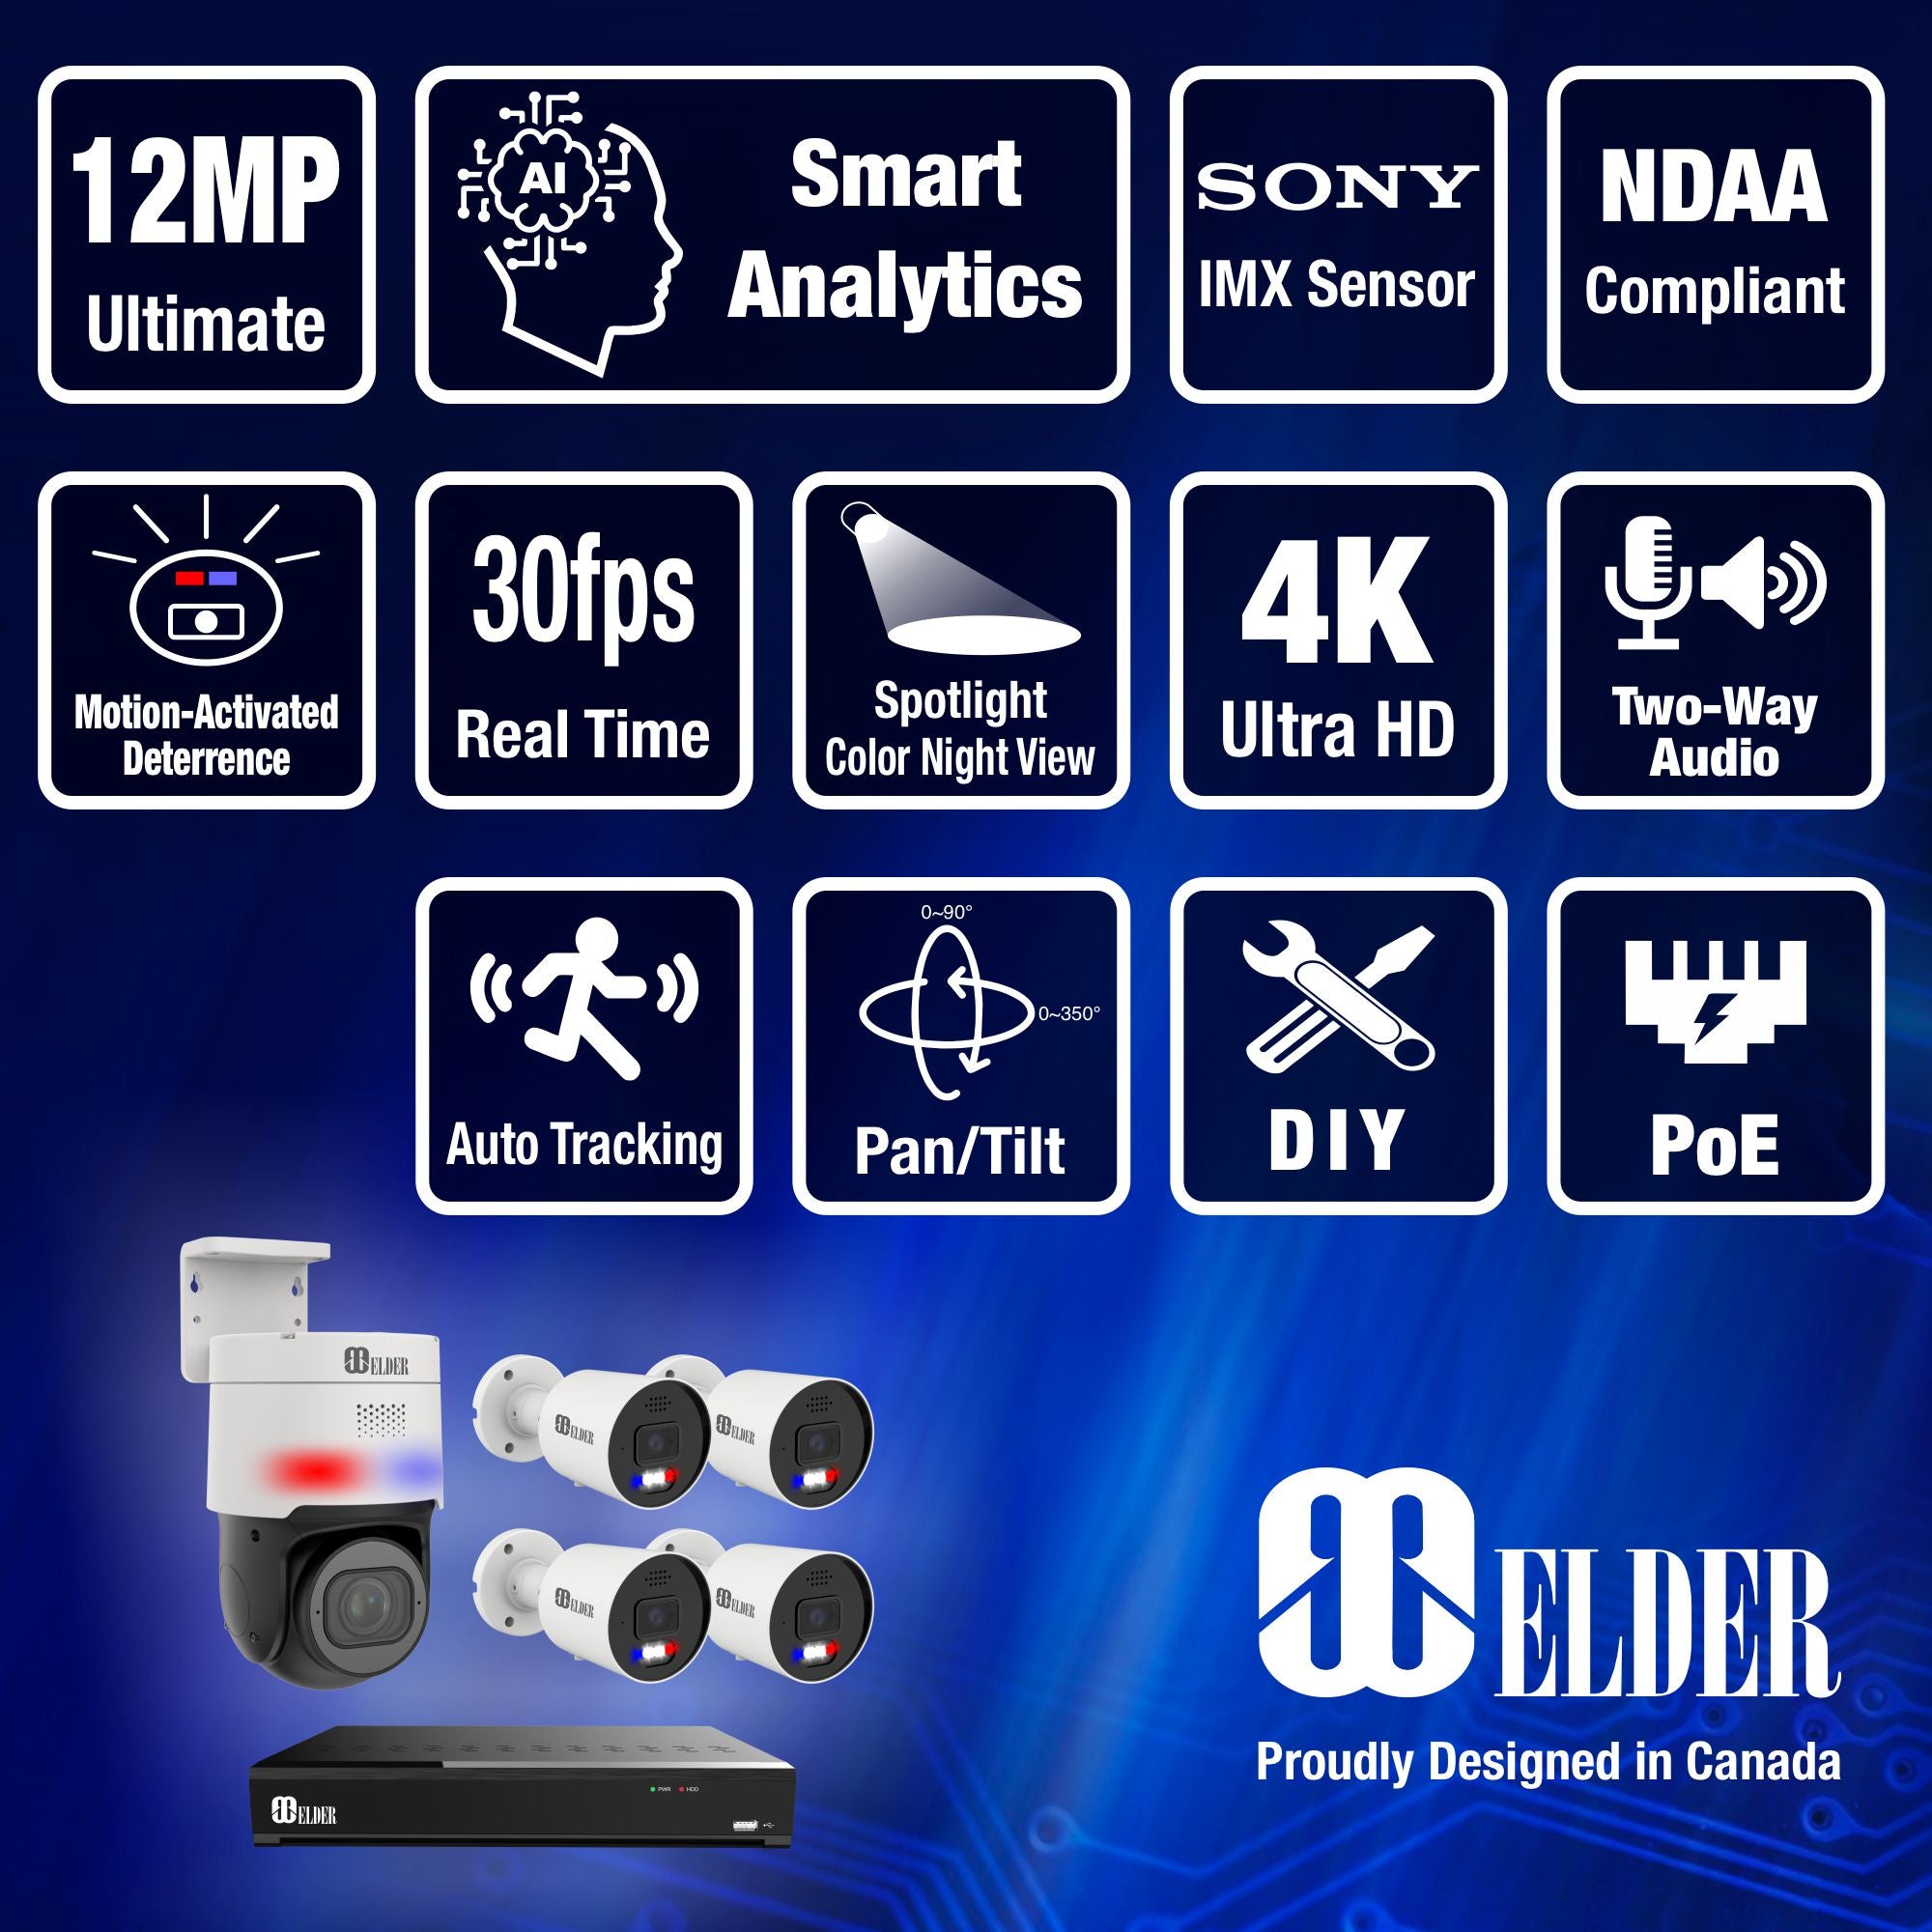 NVR Security Camera System PTZ Motorized Zoom from Elder Nocturnal Surveillance Camera System Series